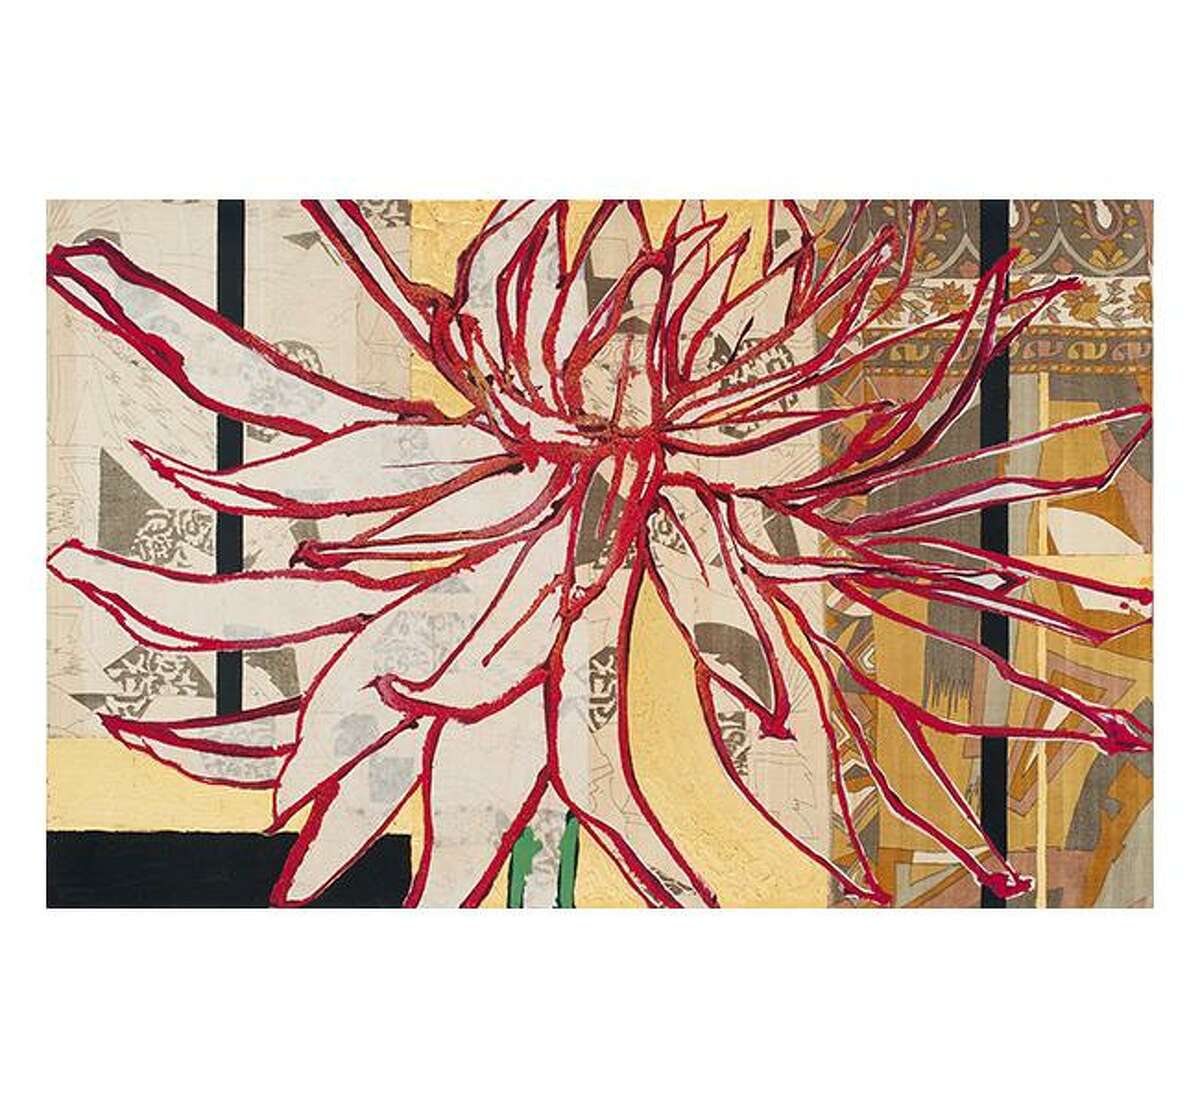 “Red Dahlia” is among paintings in Robert Kushner’s solo show “Reverie: Dupatta-Topia,” at Texas Gallery through Jan. 5.